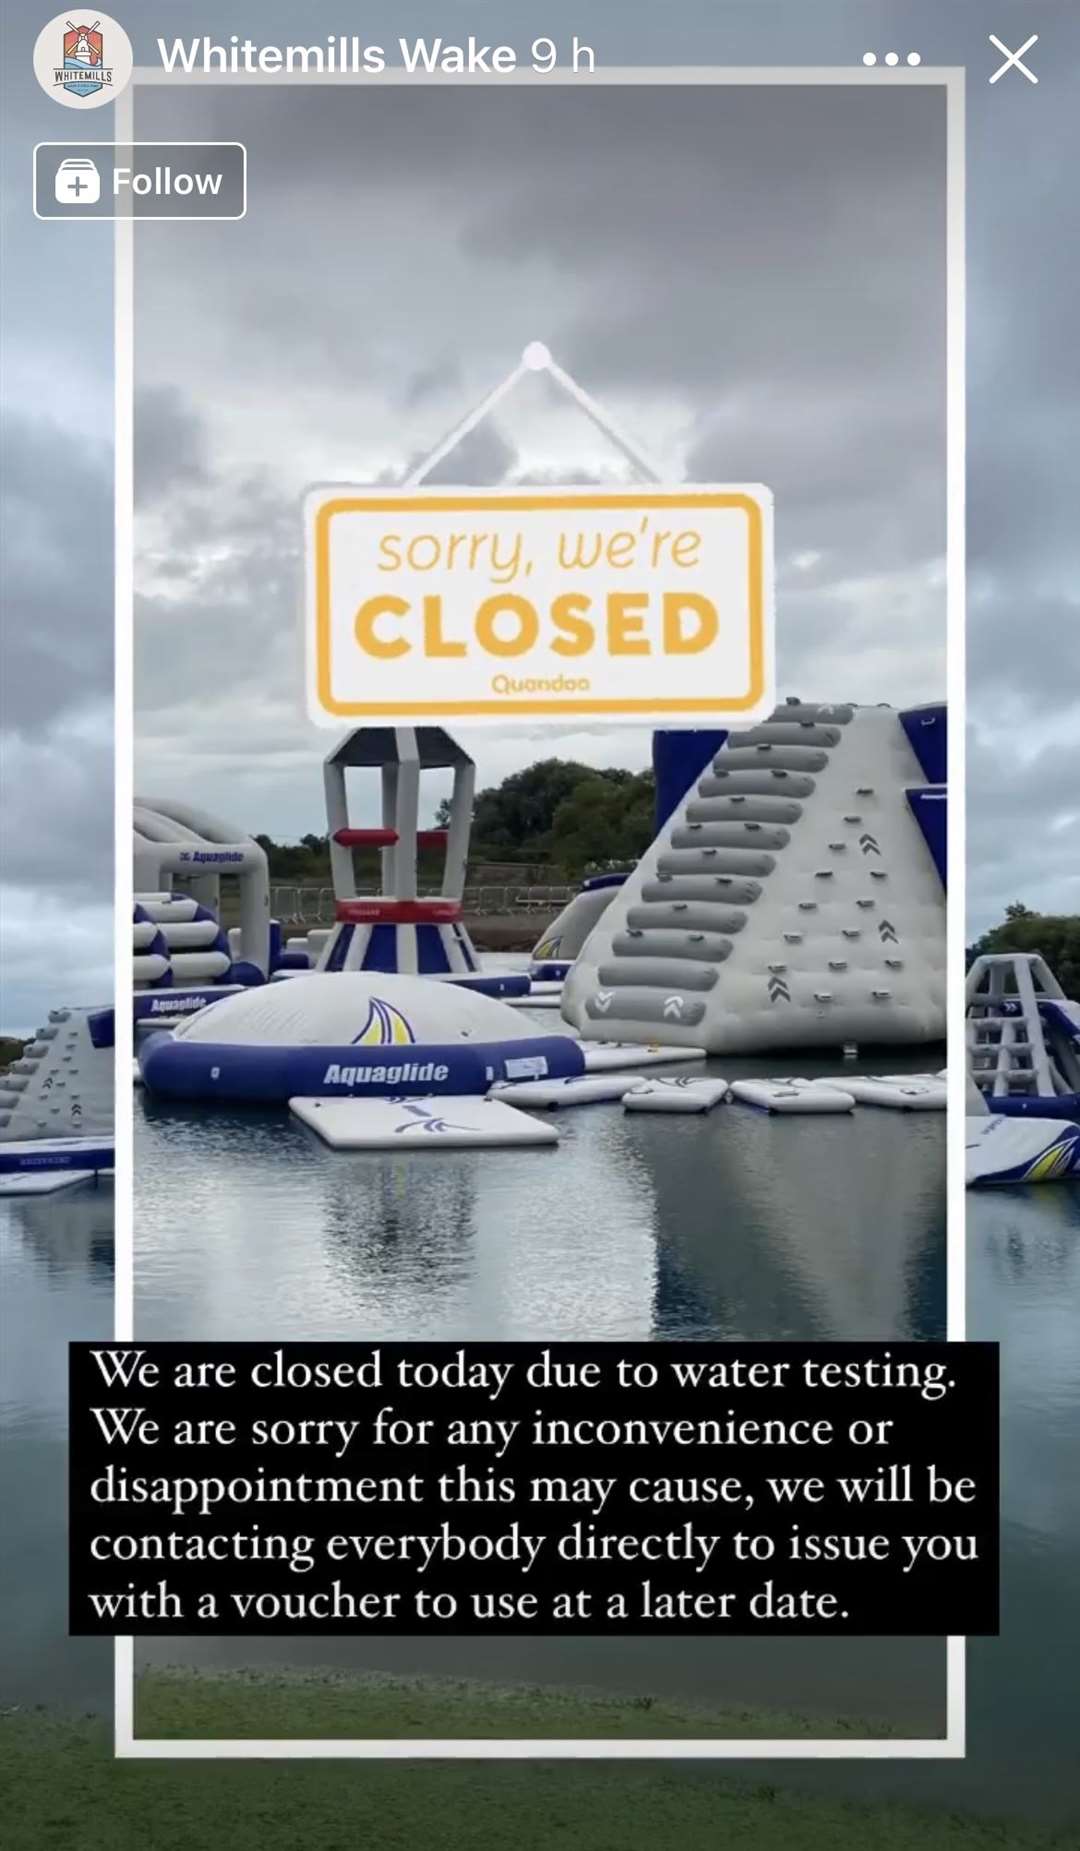 Whitemill Water Park announced the closure on a Facebook story. Picture: Whitemills Wake on Facebook